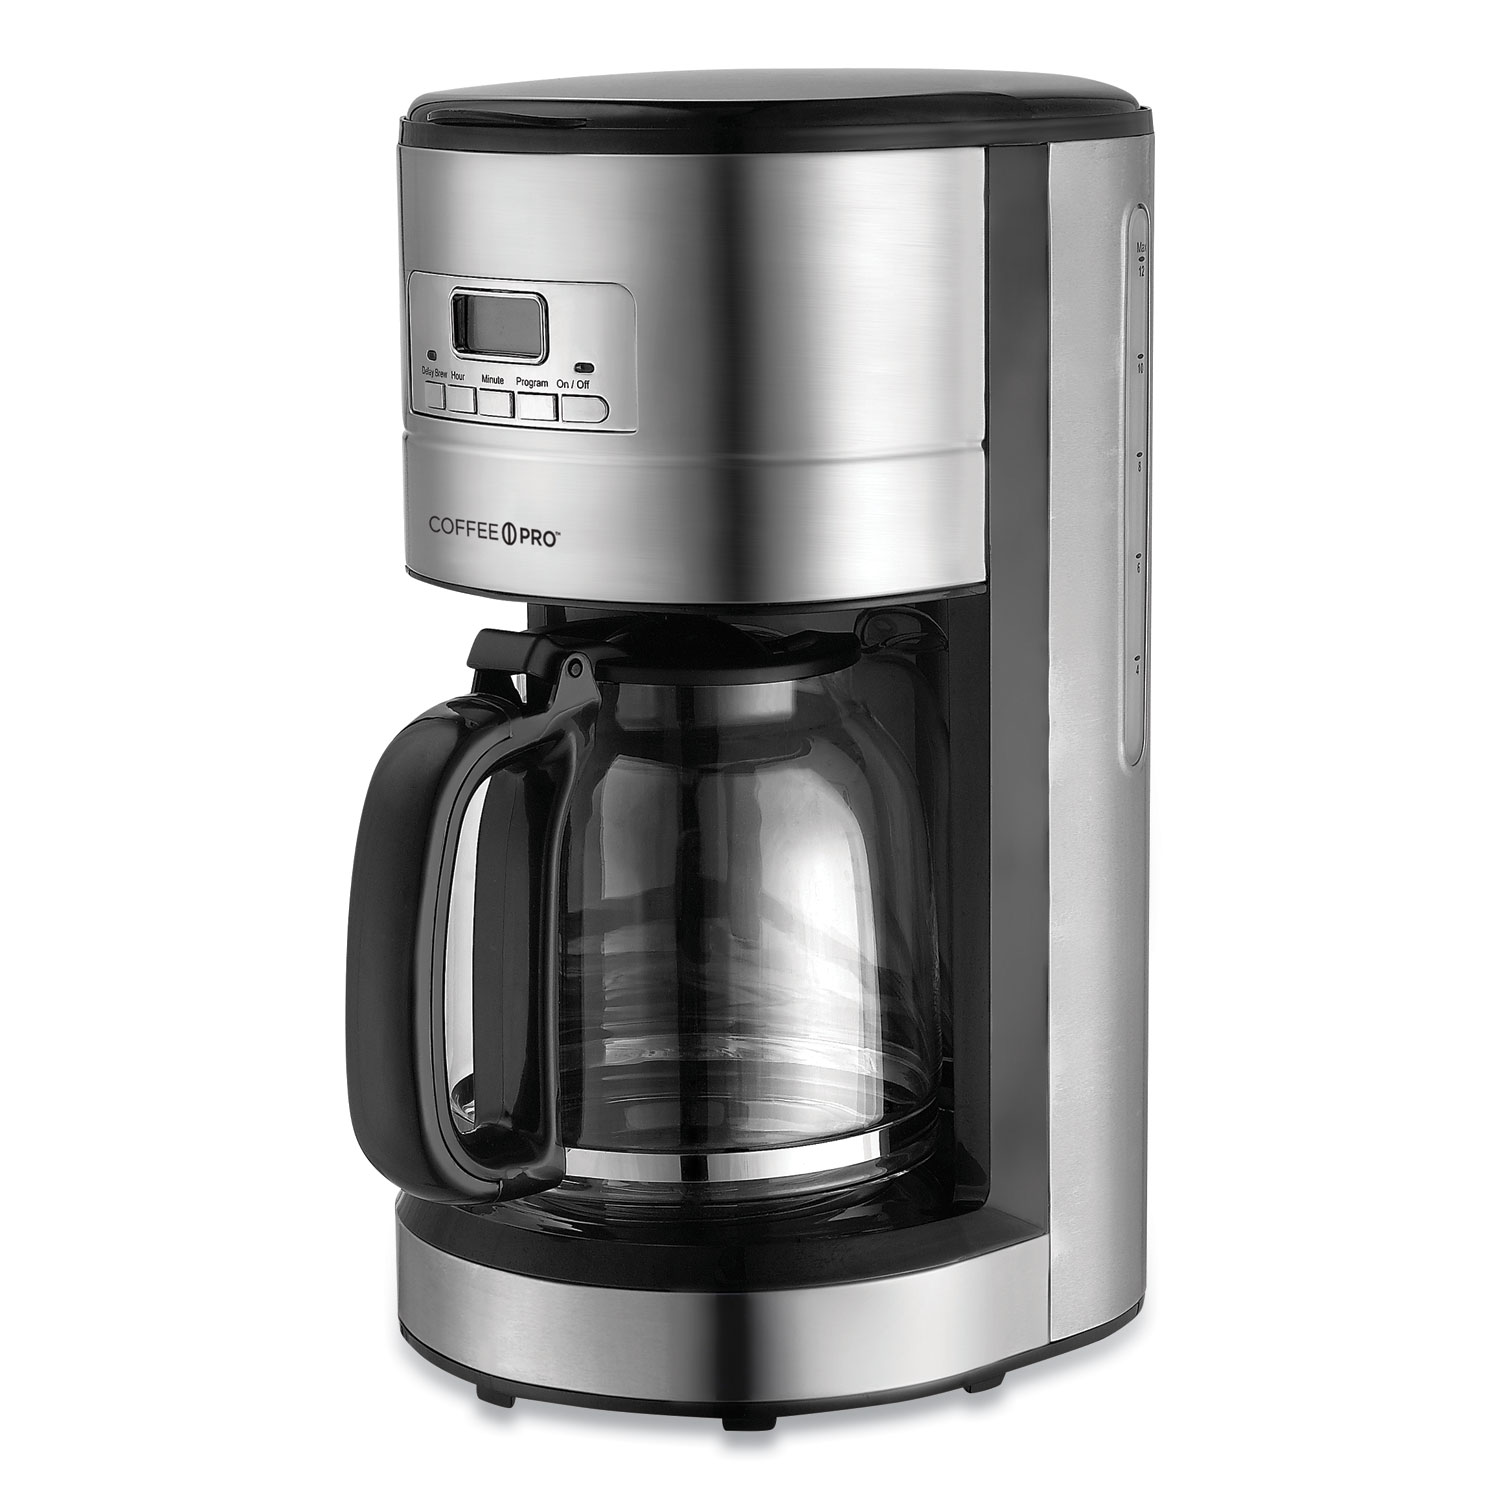 Home/Office Euro Style Coffee Maker, Stainless Steel